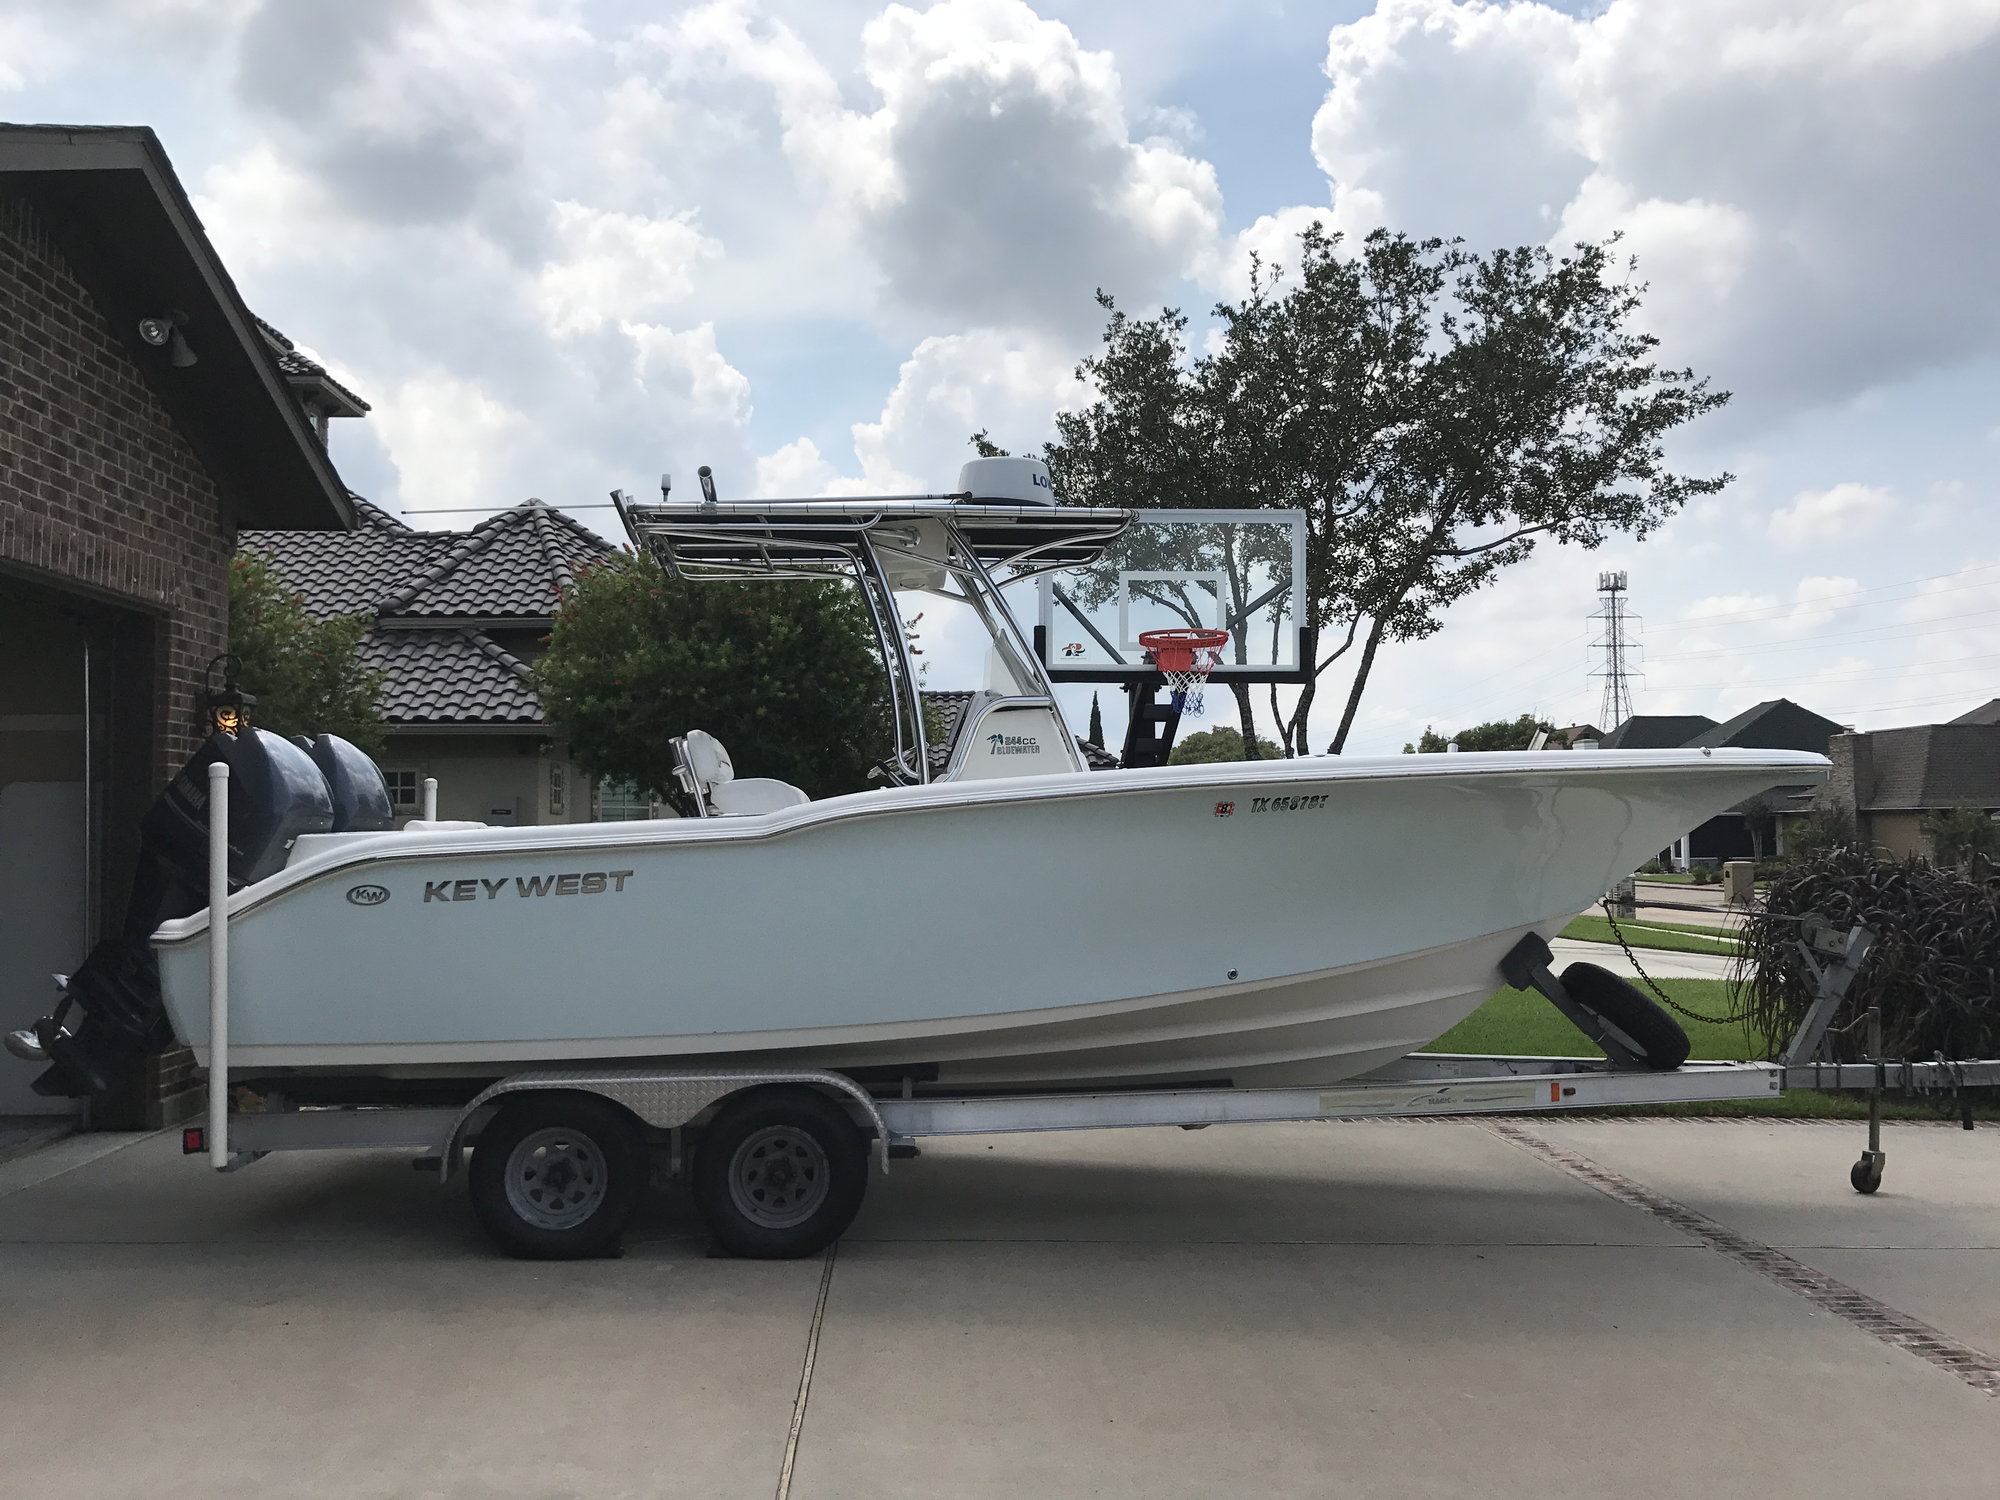 Key West 244CC For Sale 2010 / 2012 Model with twin ...